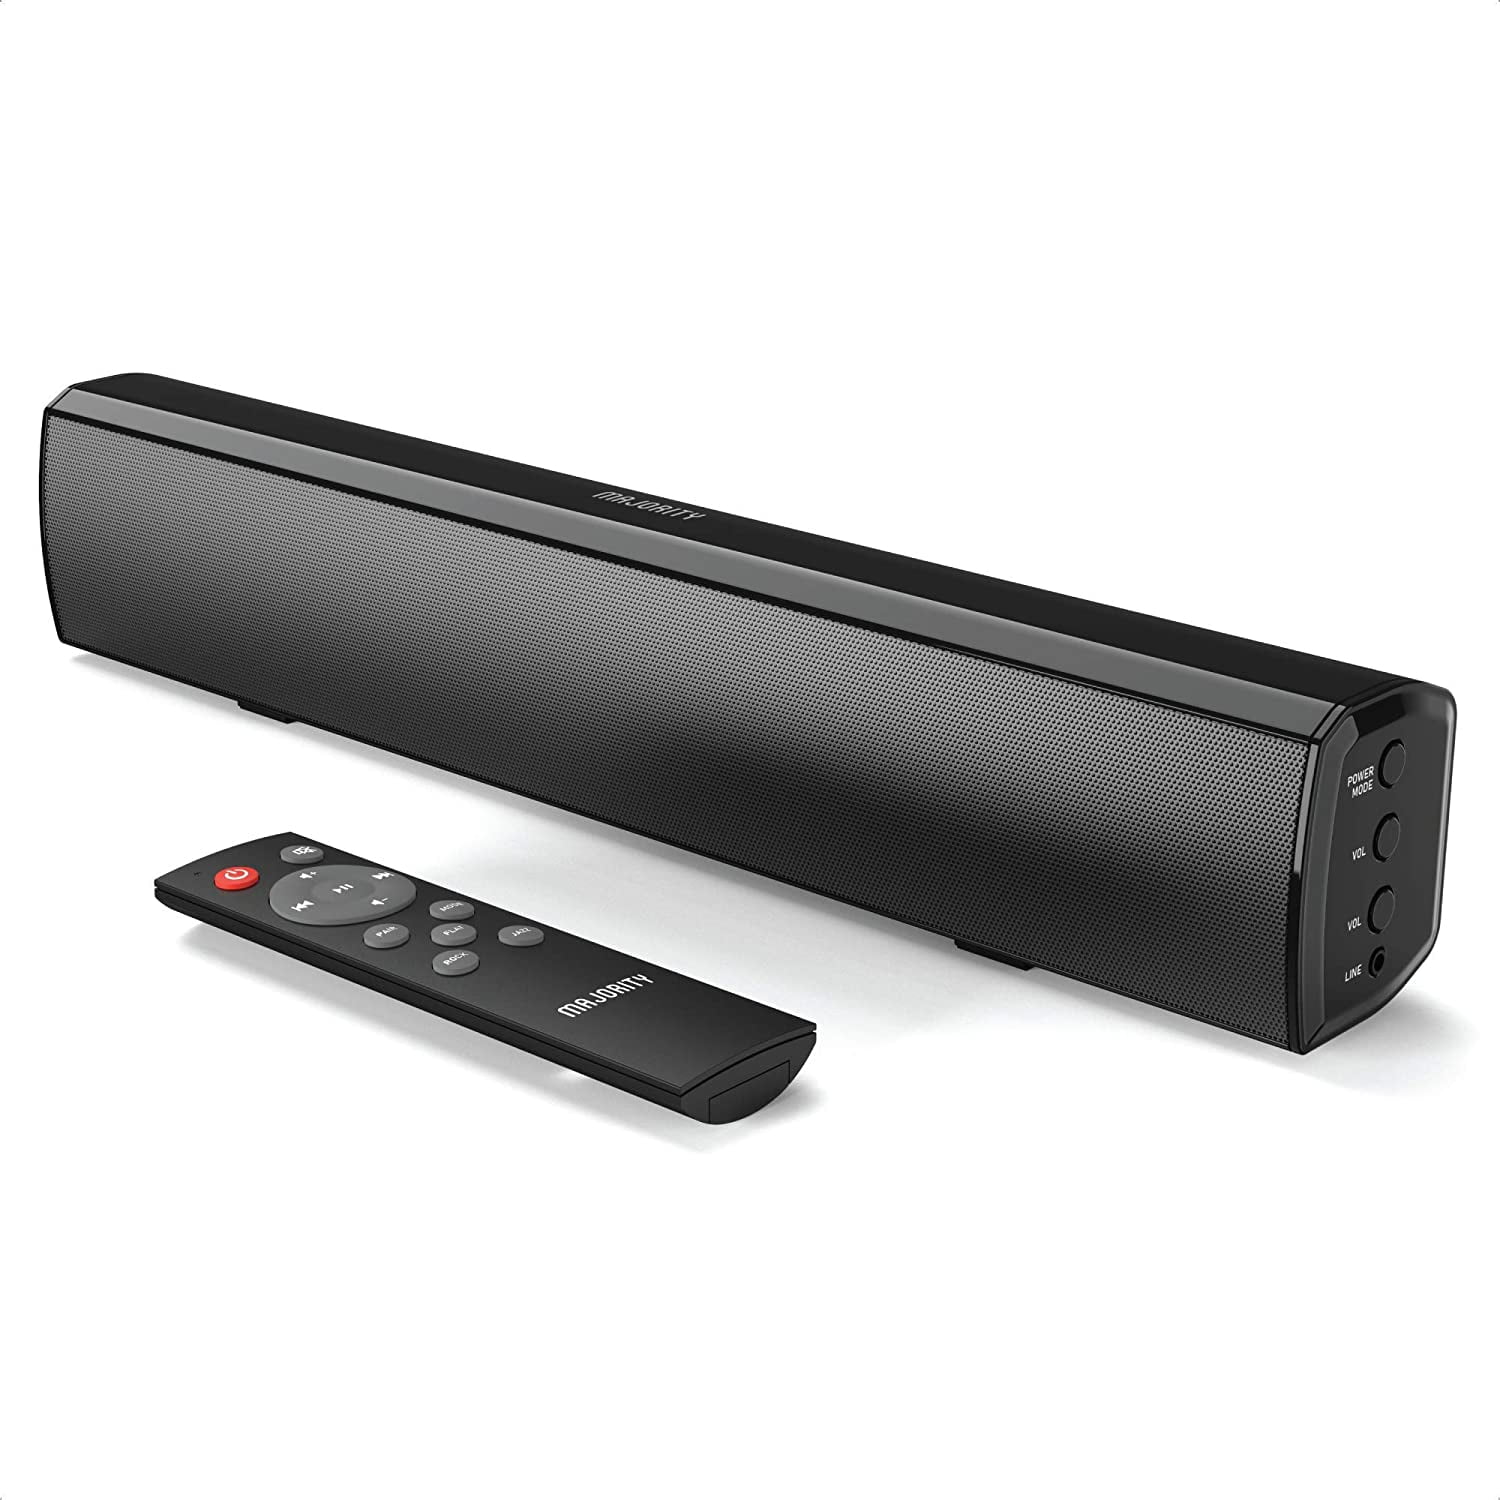 image 0 of Majority Bowfell Small Sound Bar for TV with Bluetooth, RCA, USB, Opt, AUX Connection, Mini Sound/Audio System for TV Speakers/Home Theater, Gaming, Projectors, 50 watt, 15 inch